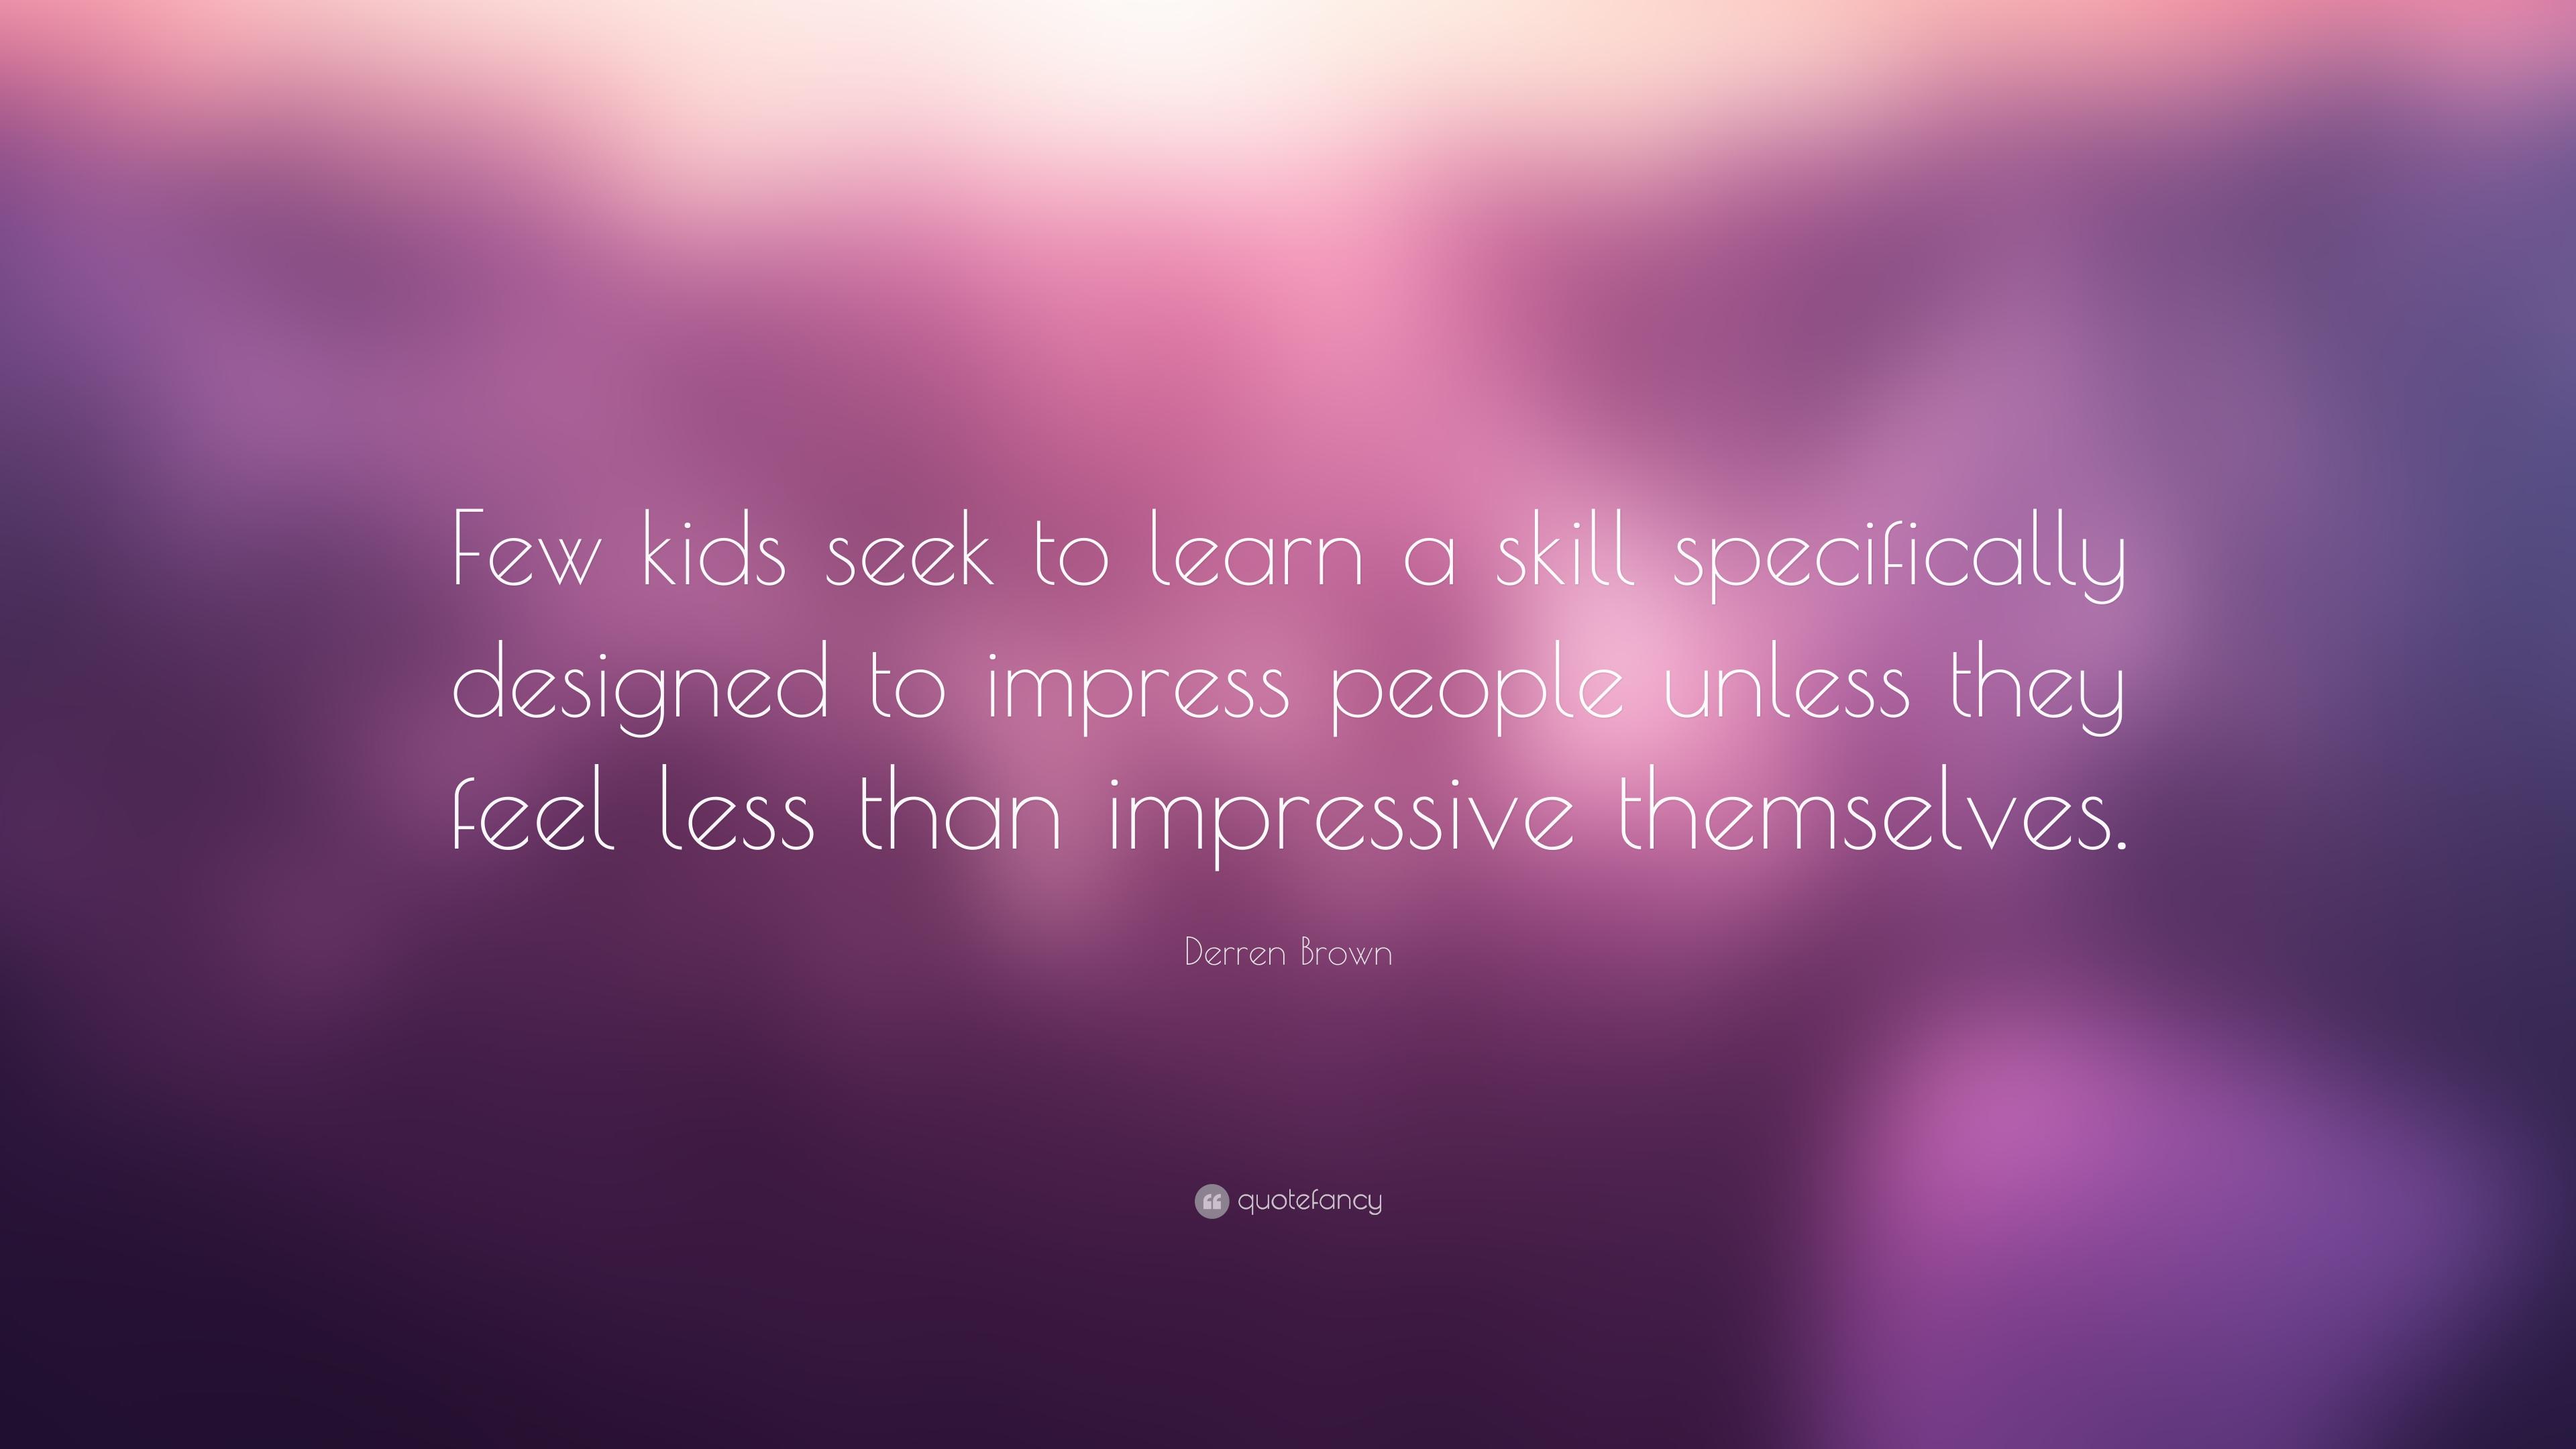 Derren Brown Quote: “Few kids seek to learn a skill specifically